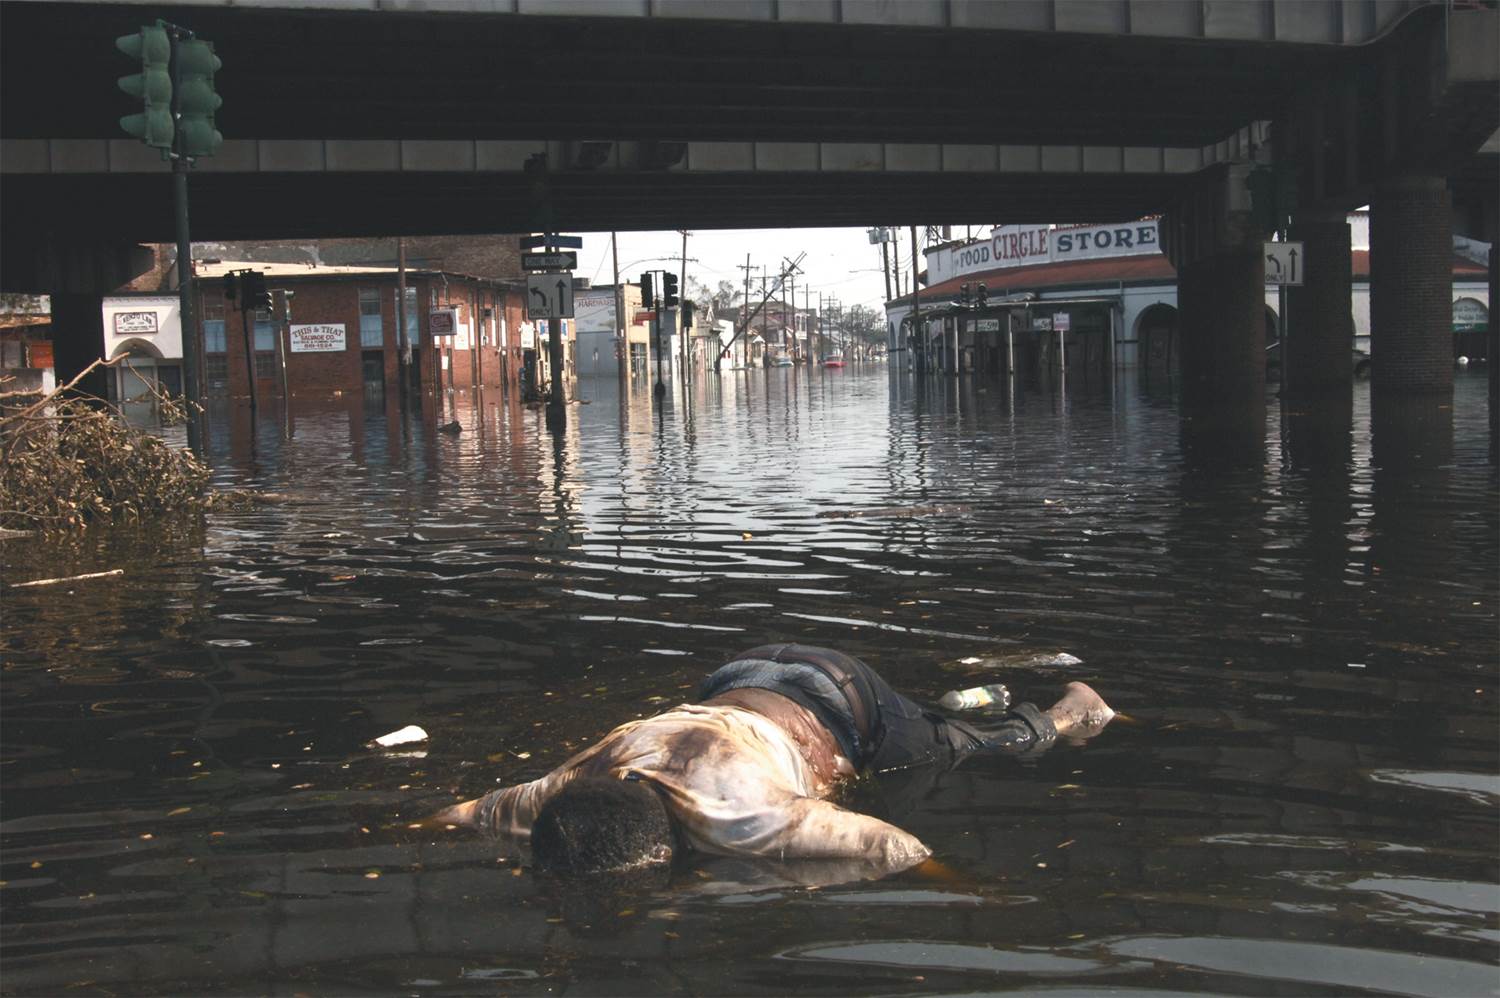 Downtown New Orleans after Hurricane Katrina.